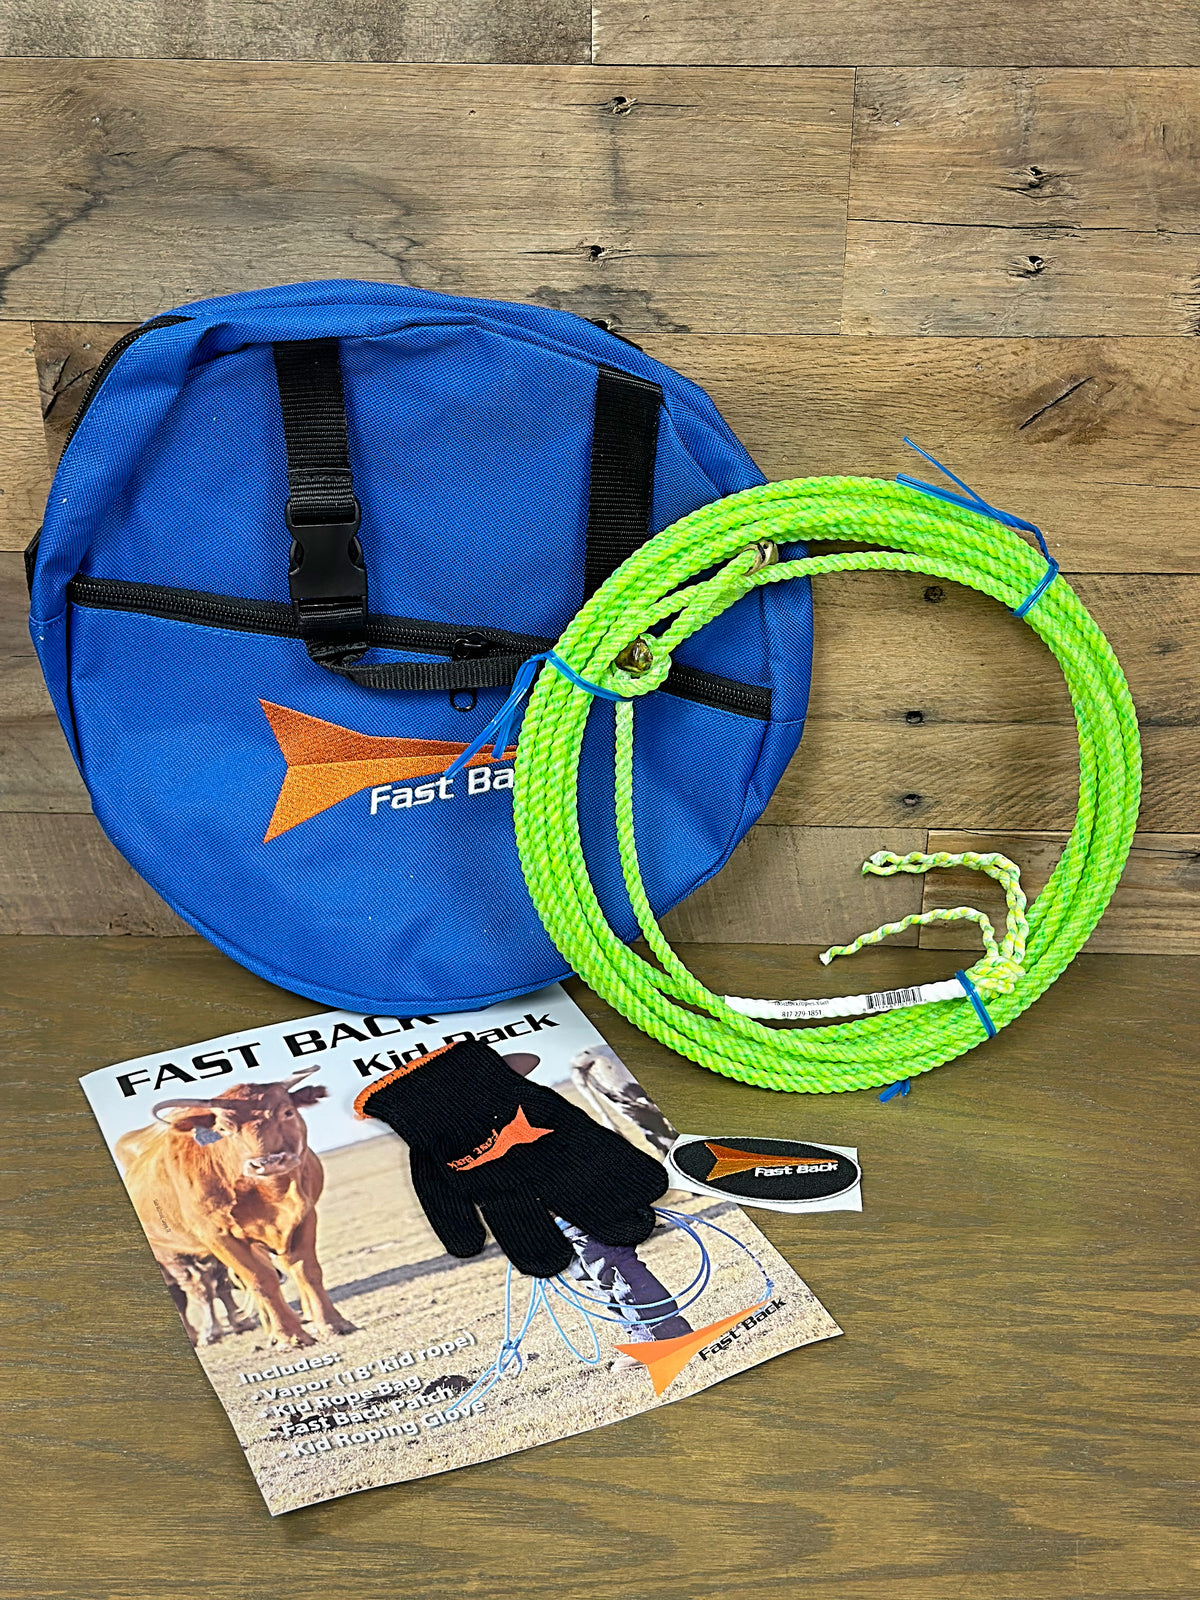 Fast Back Vapor Kid's Rope Pack (Assorted Colors)